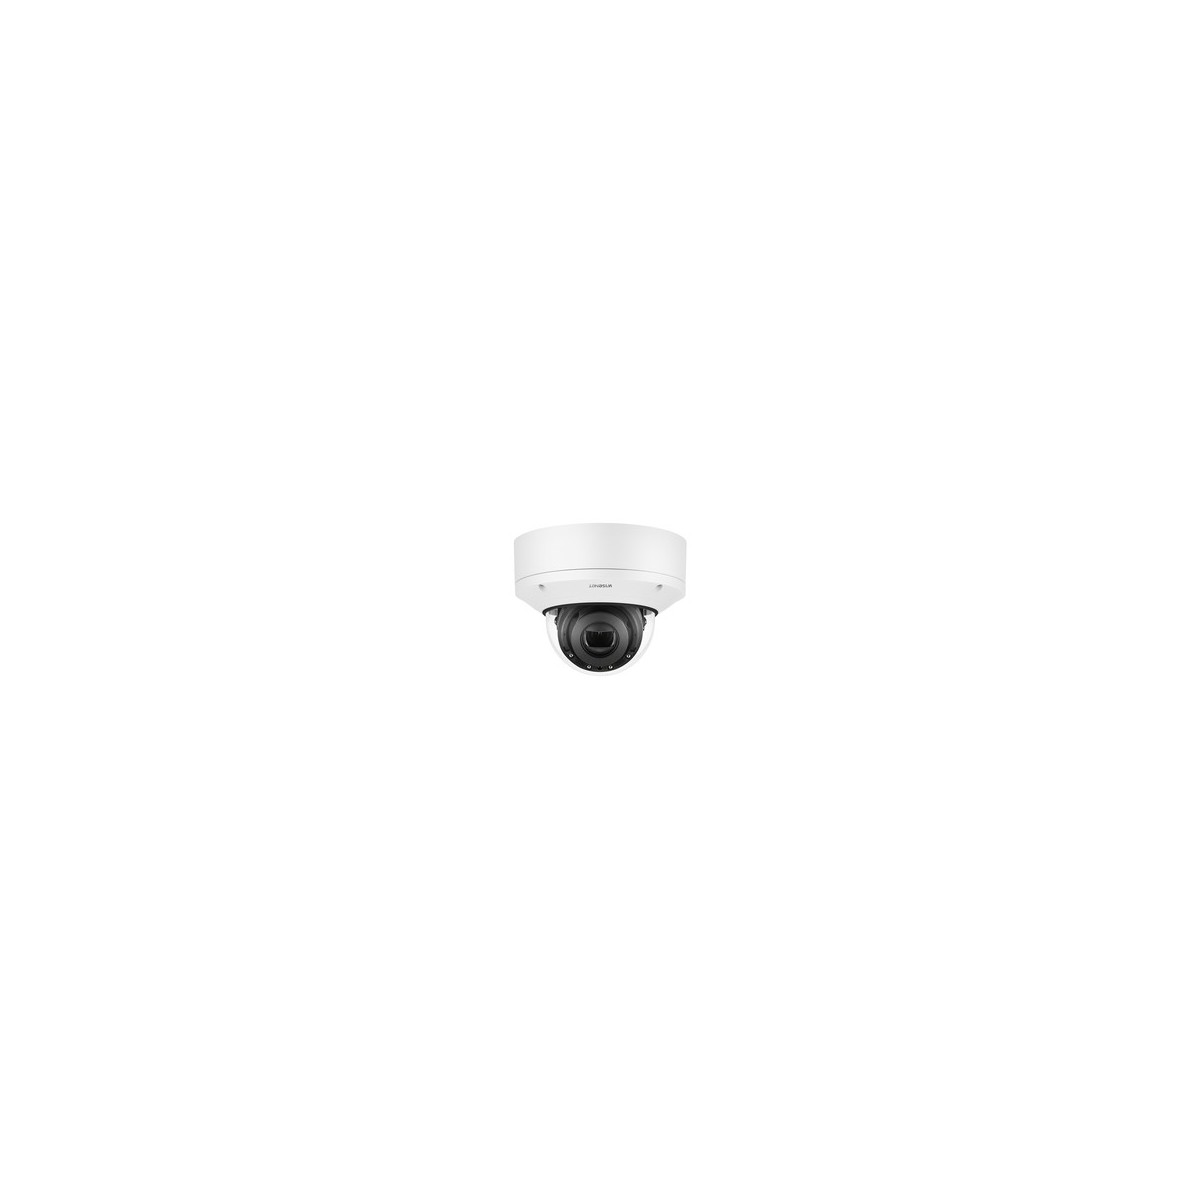 Hanwha Techwin Hanwha Wisenet X - IP security camera - Indoor  outdoor - Wired - Ceiling - White - Dome